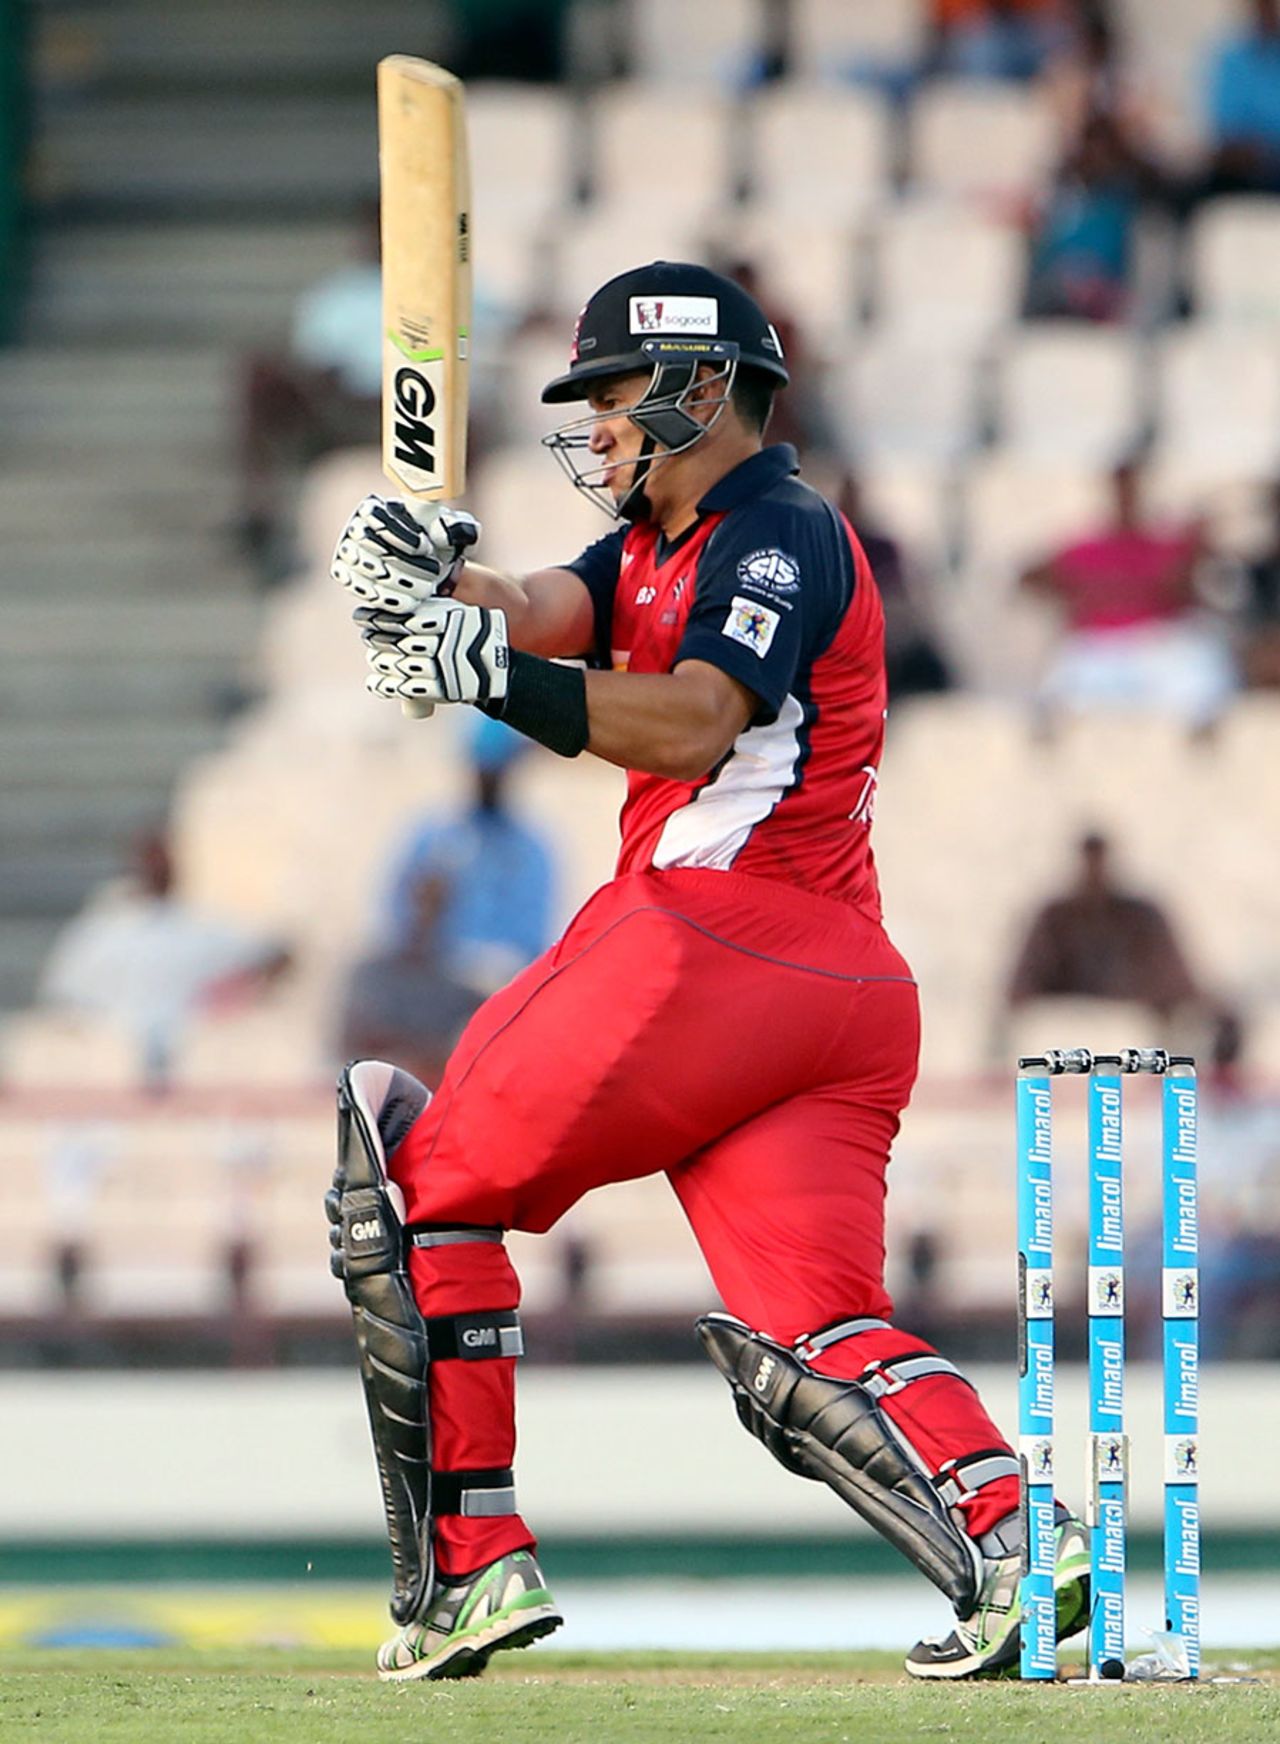 Ross Taylor scored an unbeaten 35 to guide Red Steel home, St Lucia Zouks v Trinidad & Tobago Red Steel, CPL 2014, Gros Islet, August 2, 2014